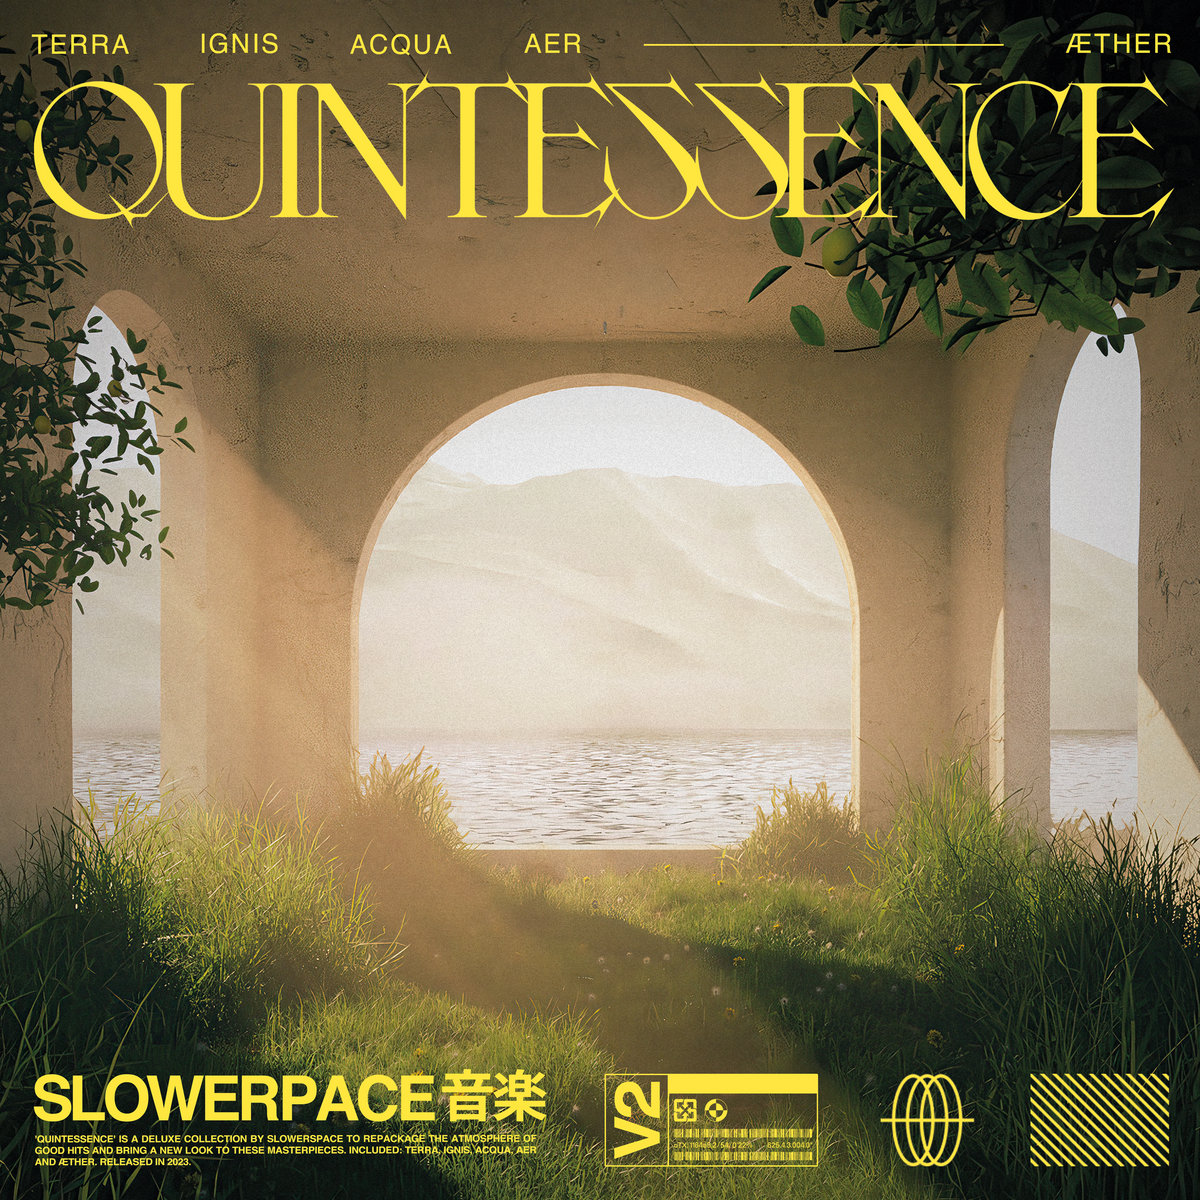 Slowerpace Quintessence cover art. An open architecture with three huge round portals leading out to a sunny seaside.